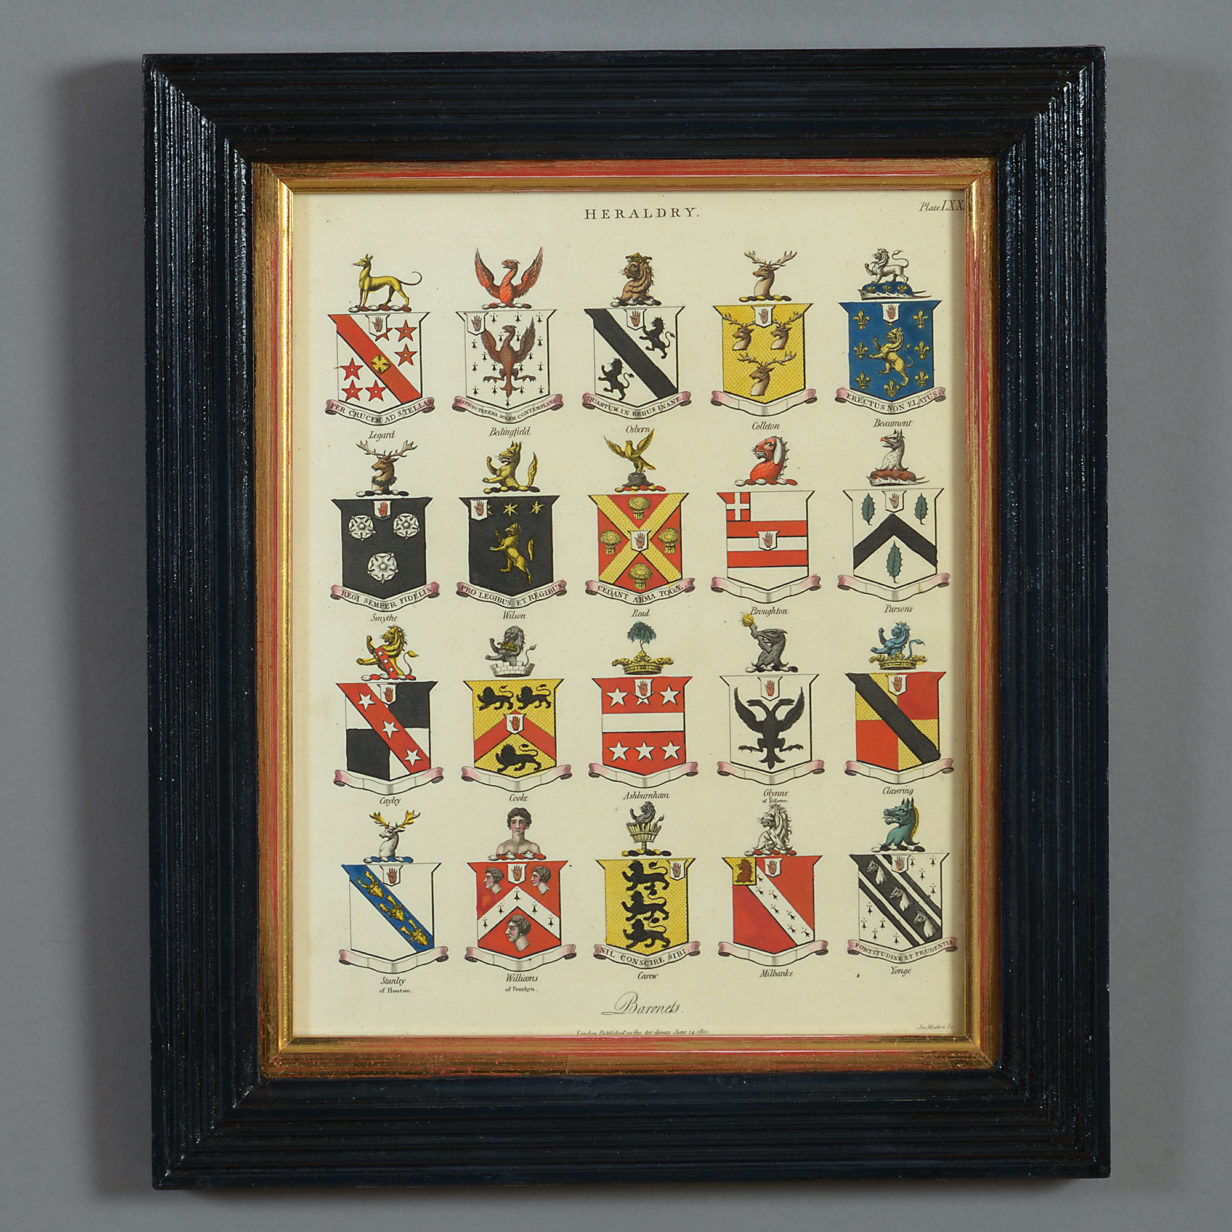 Set of six 19th century hand coloured heraldic engravings depicting the arms of esquires and gentlemen of england